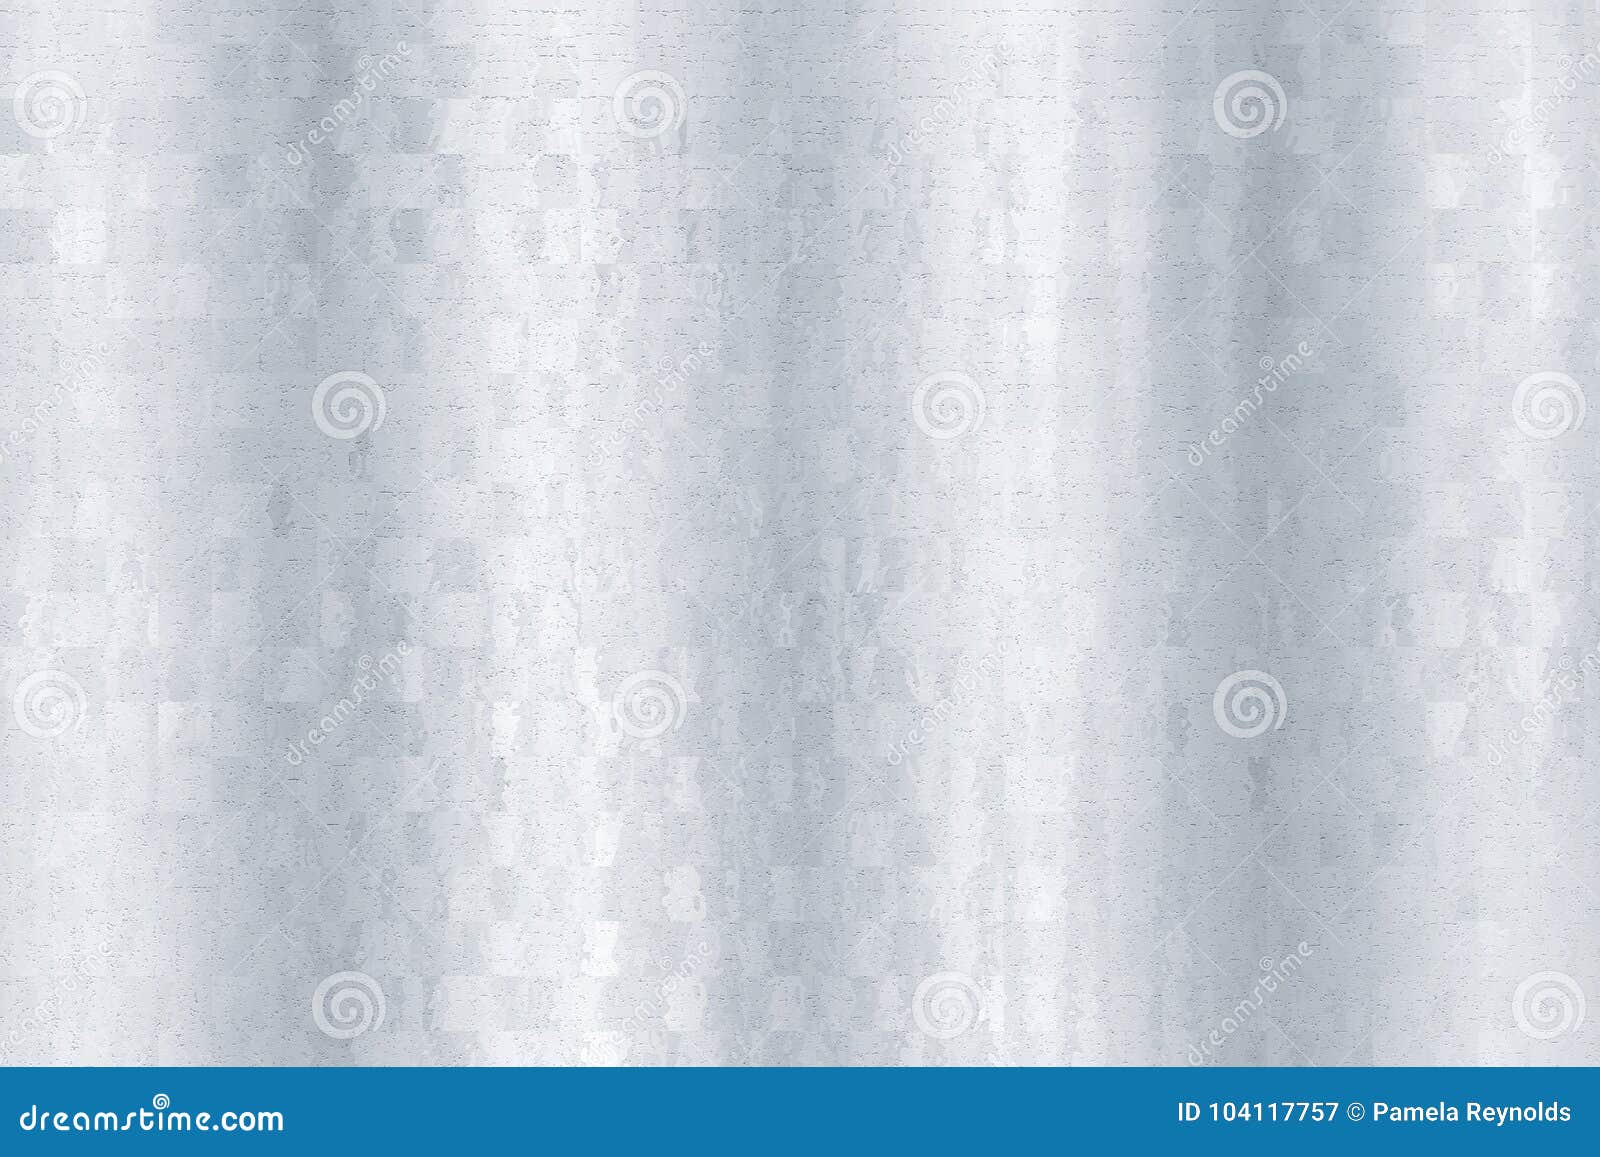 pale grey/silver squared abstract for backgrounds